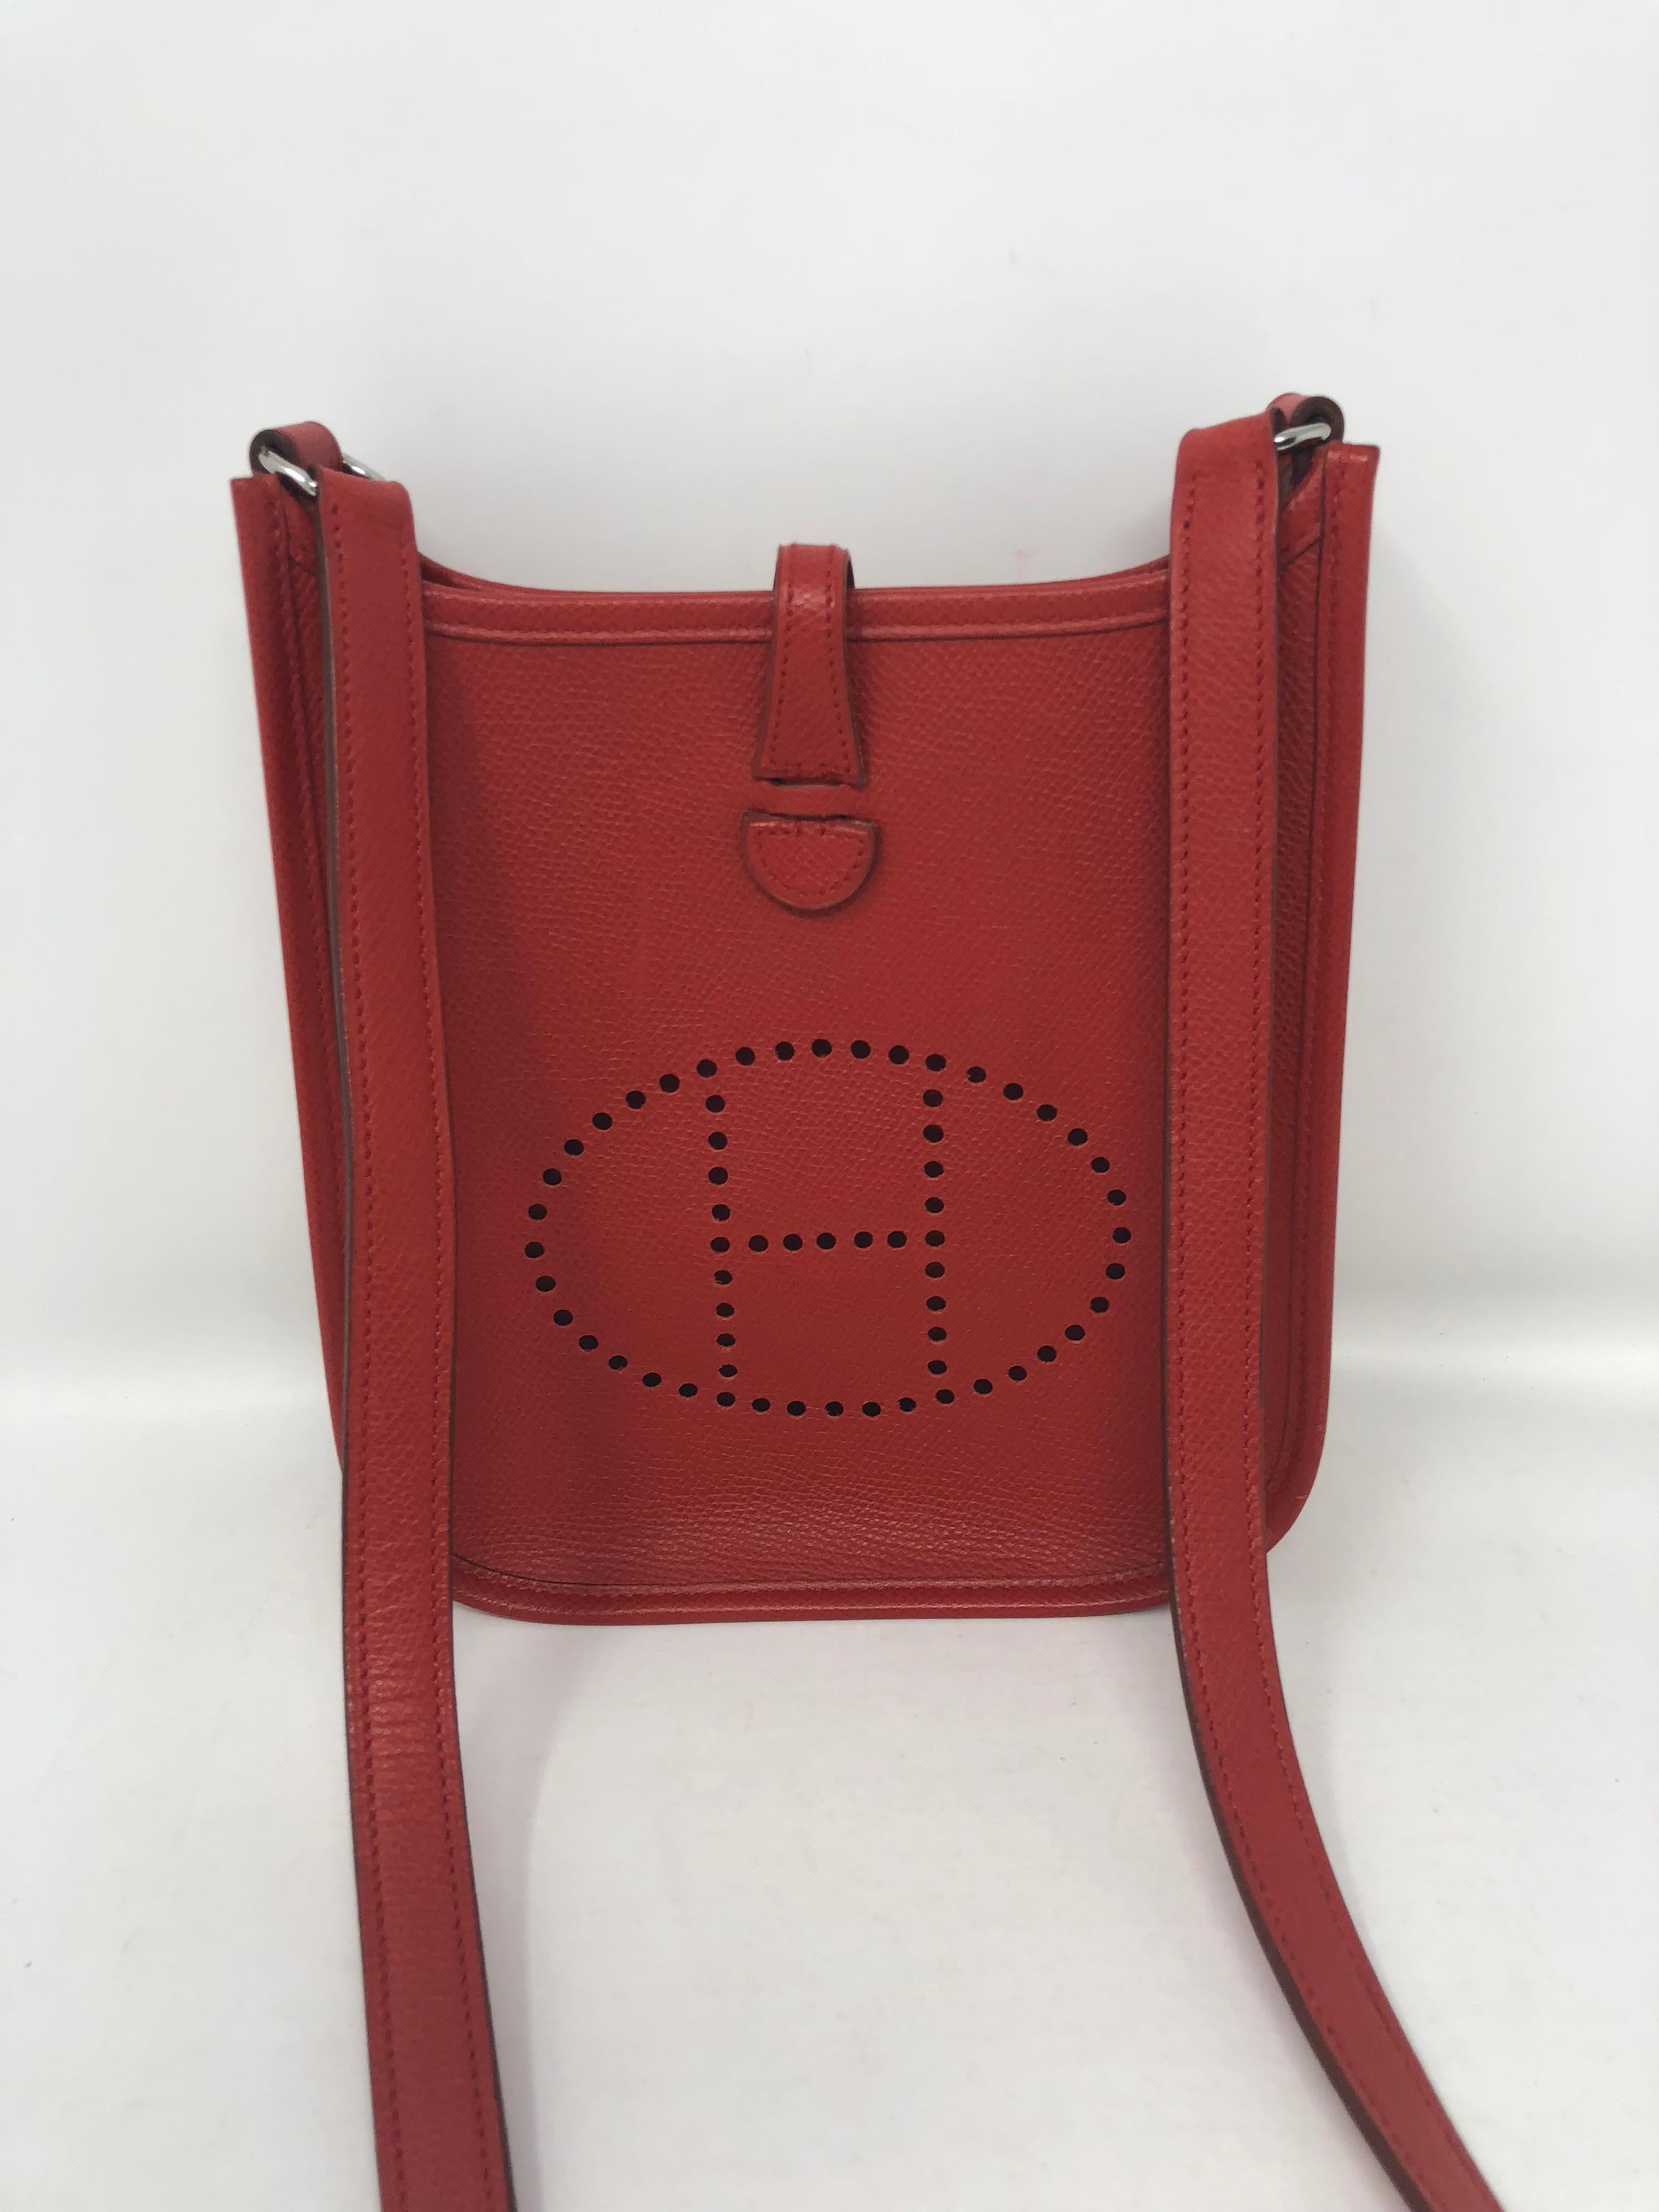 Red Hermes Evelyne TPM Mini crossbody bag in Epsom leather which is scratch resistant.  Palladium hardware. Mini size is hard to find and rouge casaque color. Signature perforated H on front of bag. Guaranteed authentic. 